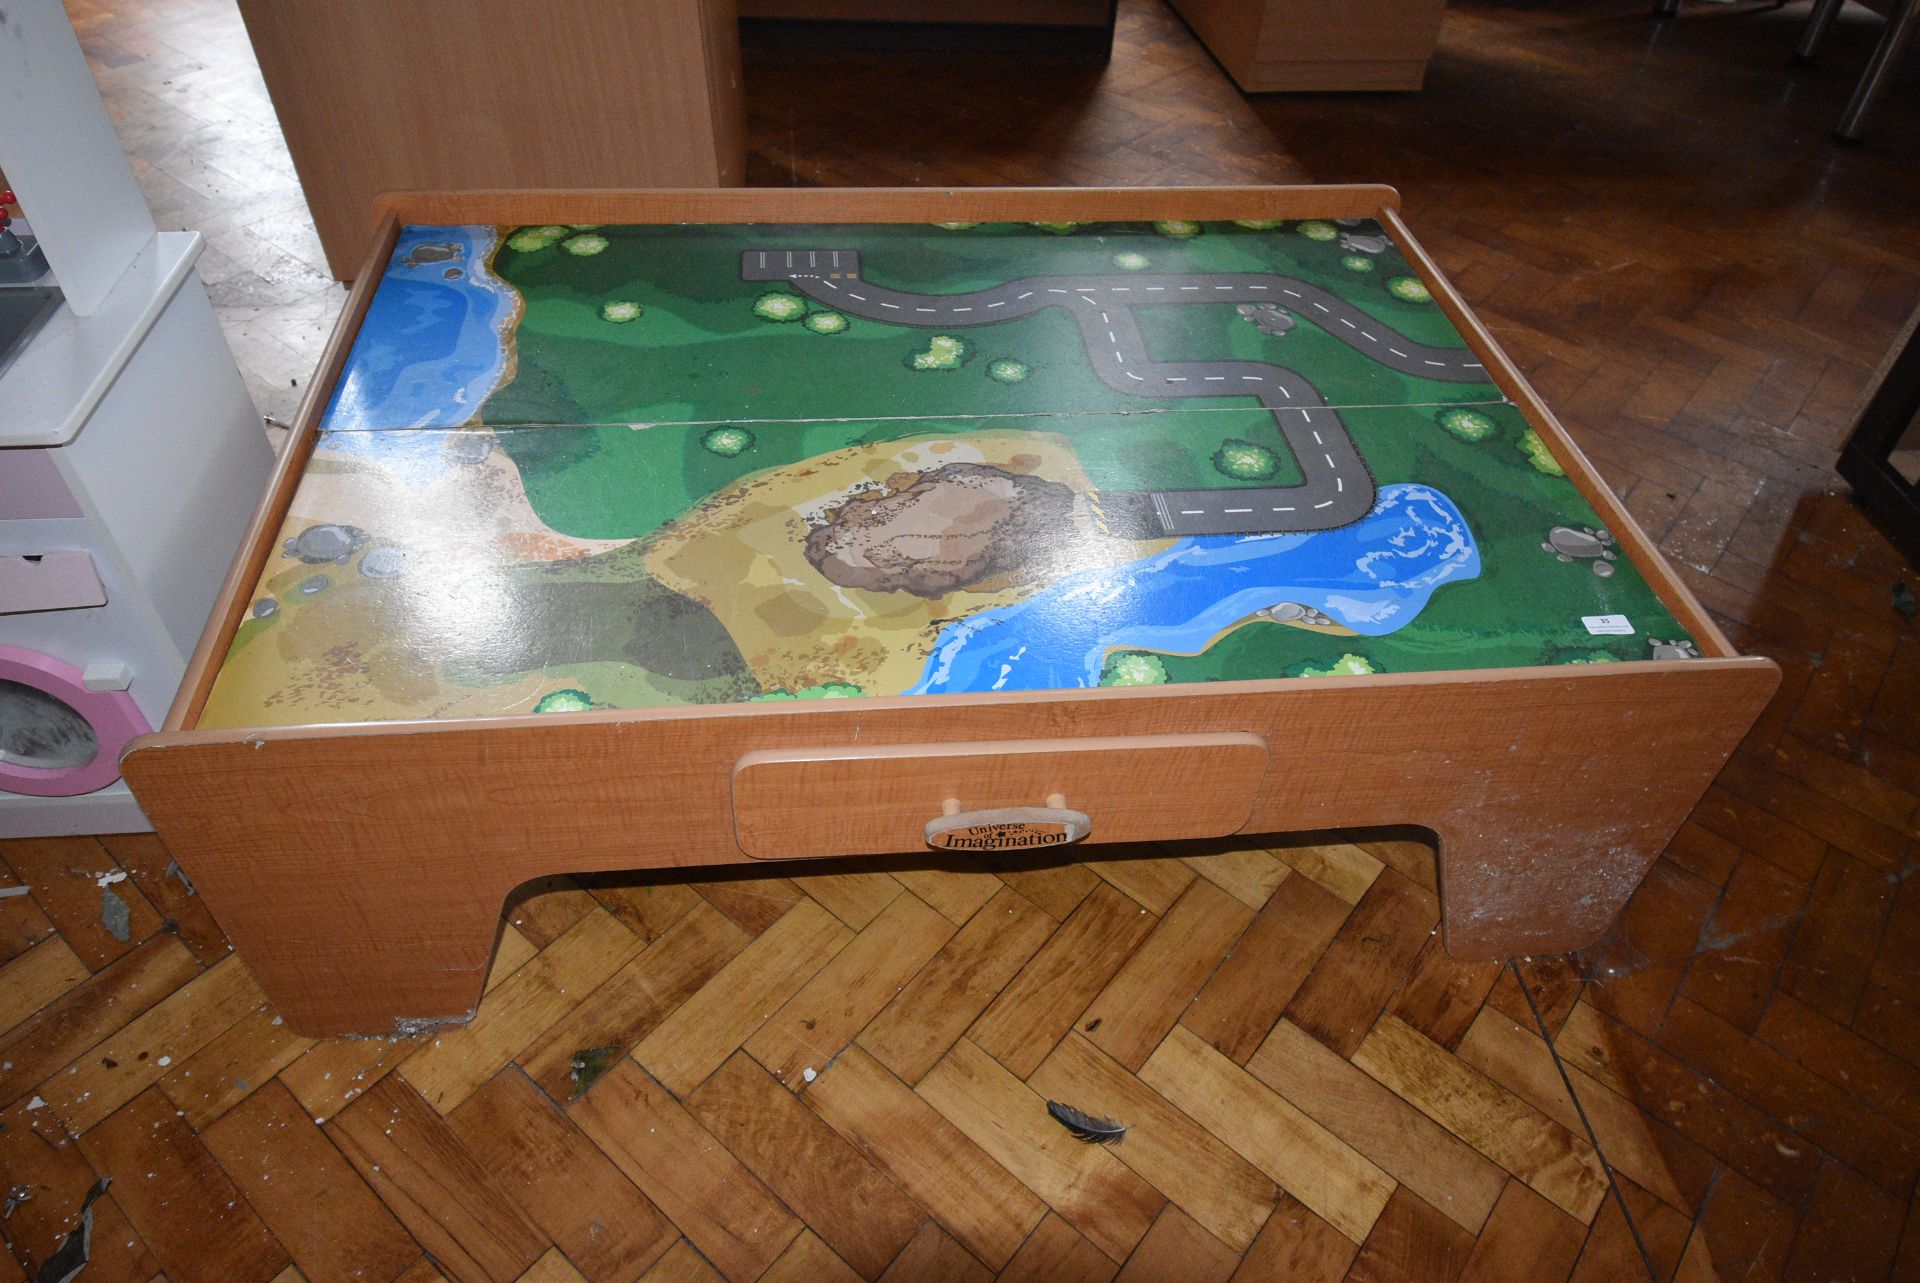 *Universe of Imagination Child’s Activity Table